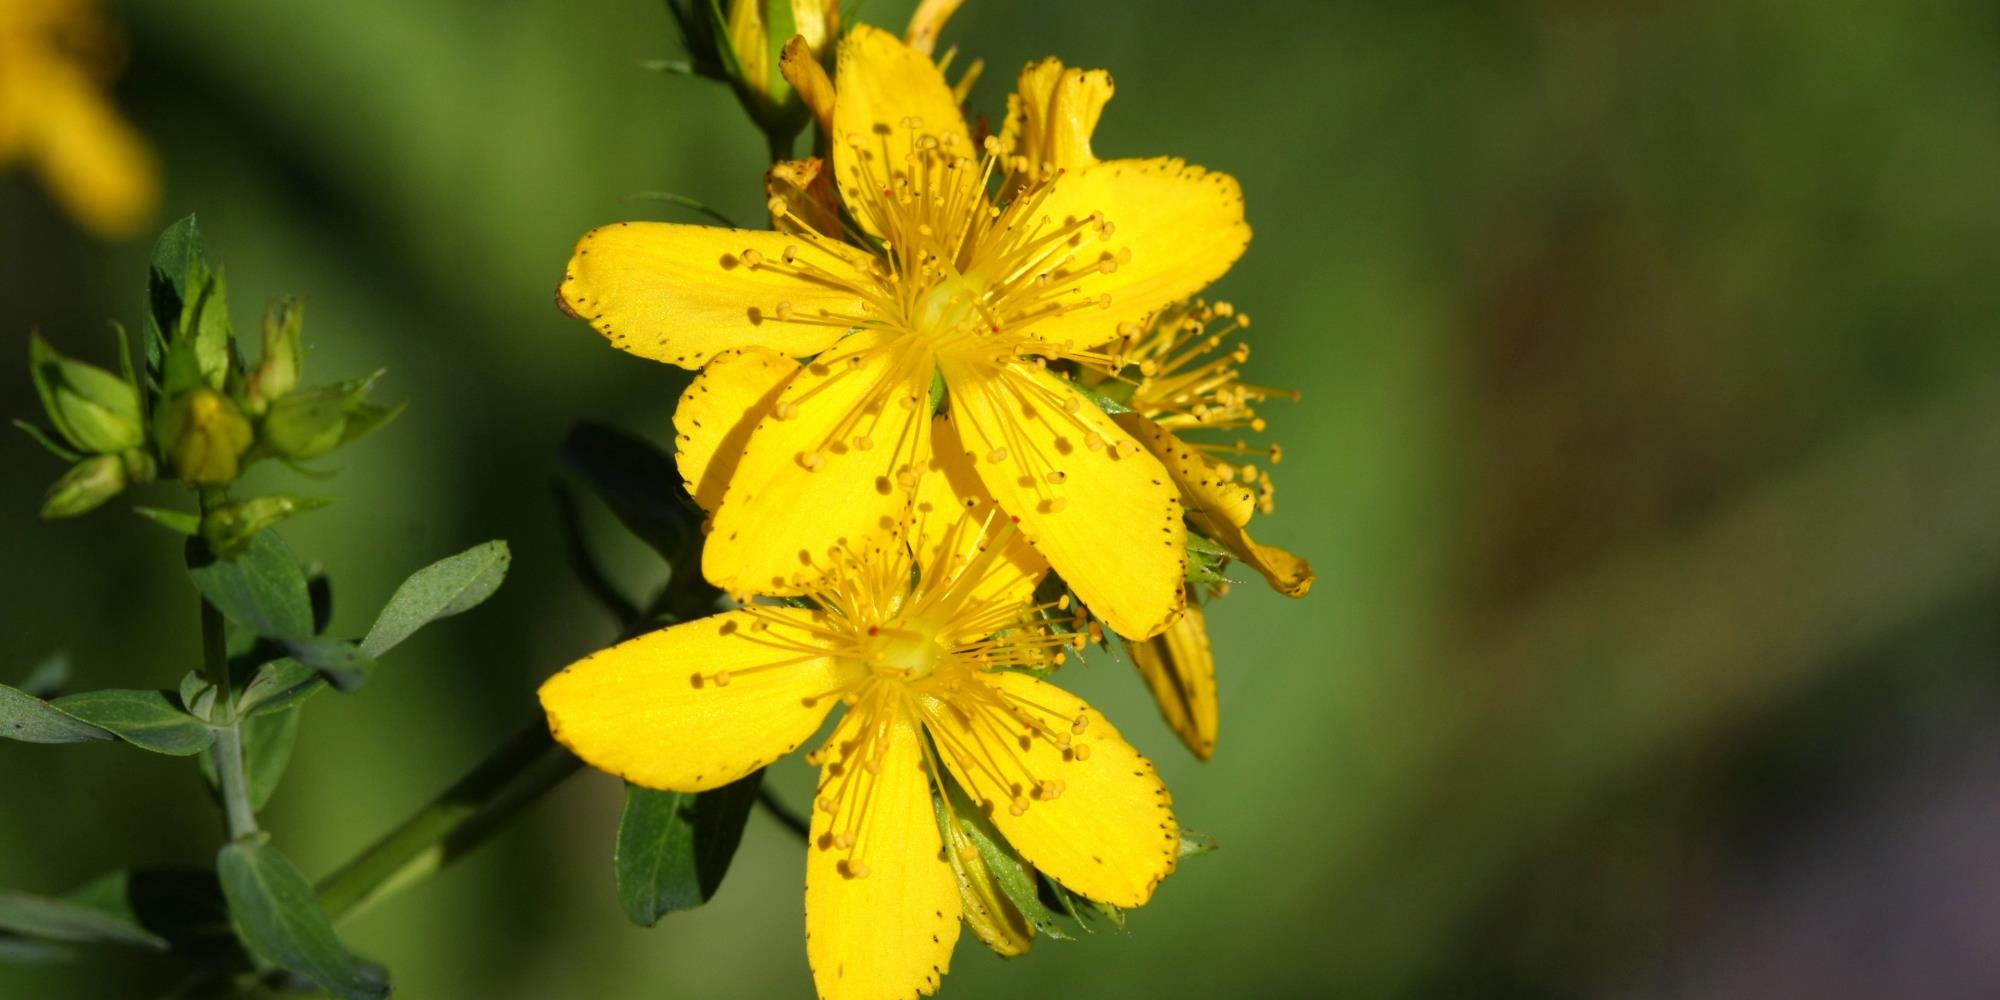 What are the benefits of St. John’s Wort?